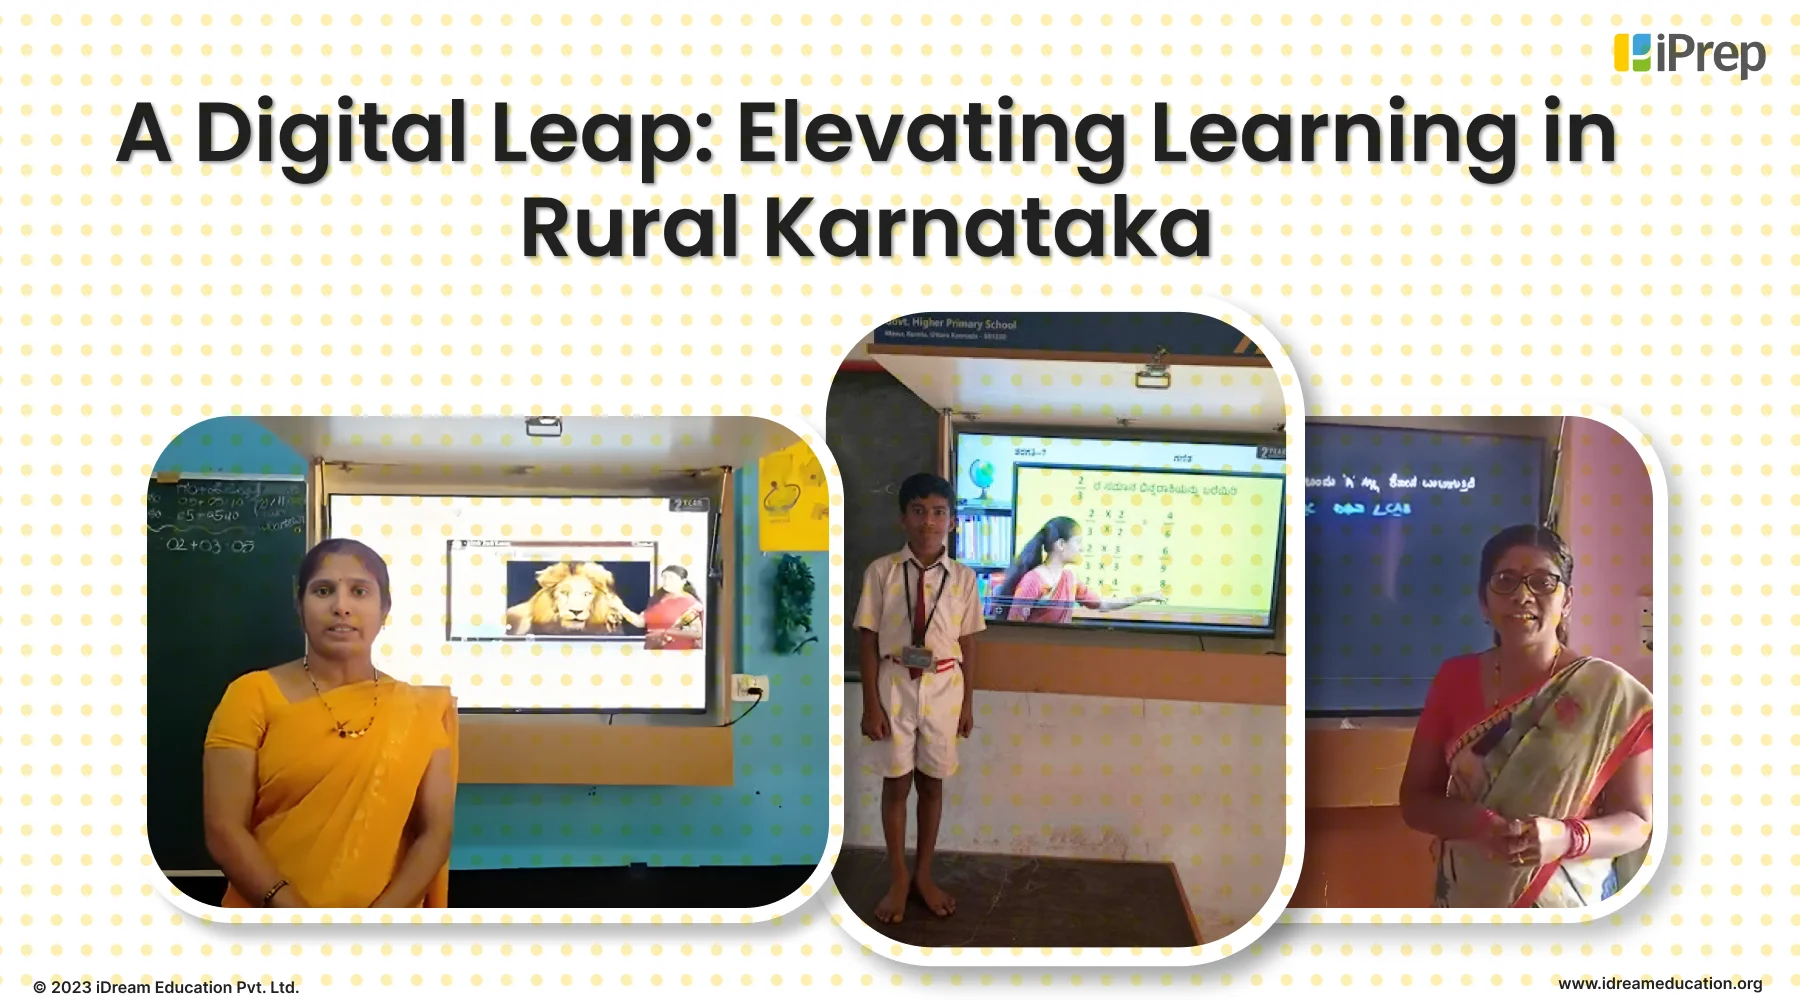 A visual of our smart class solution - the iPrep Digital Class elevating digital learning in rural Karnataka